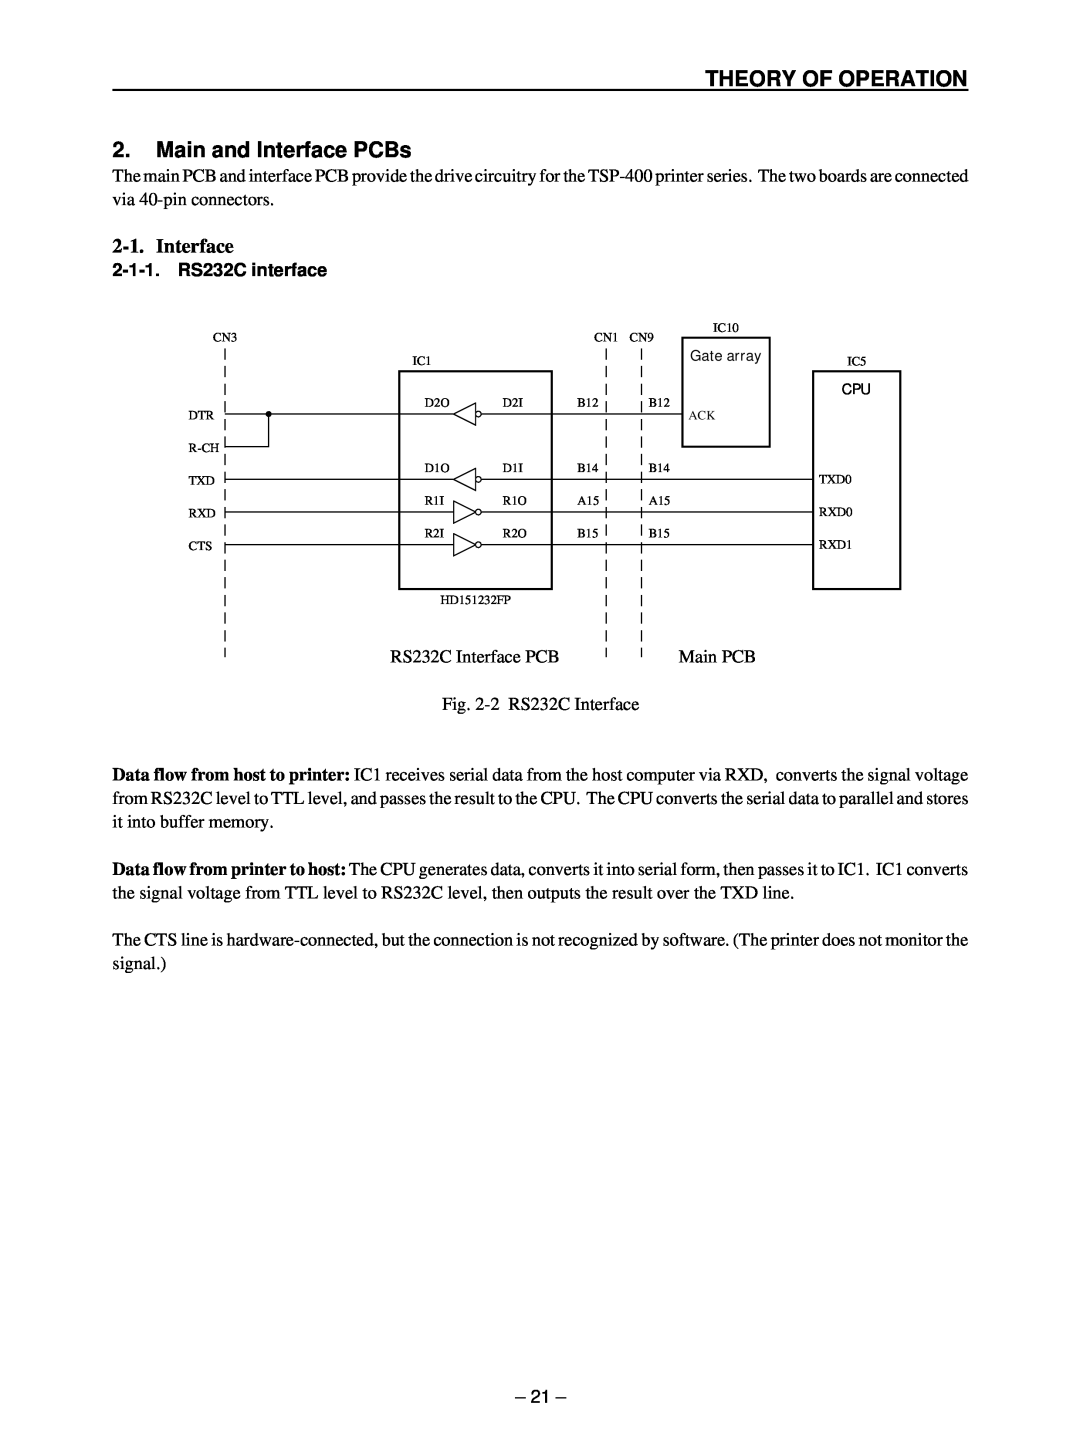 Star Micronics TSP400 technical manual THEORY OF OPERATION 2. Main and Interface PCBs 